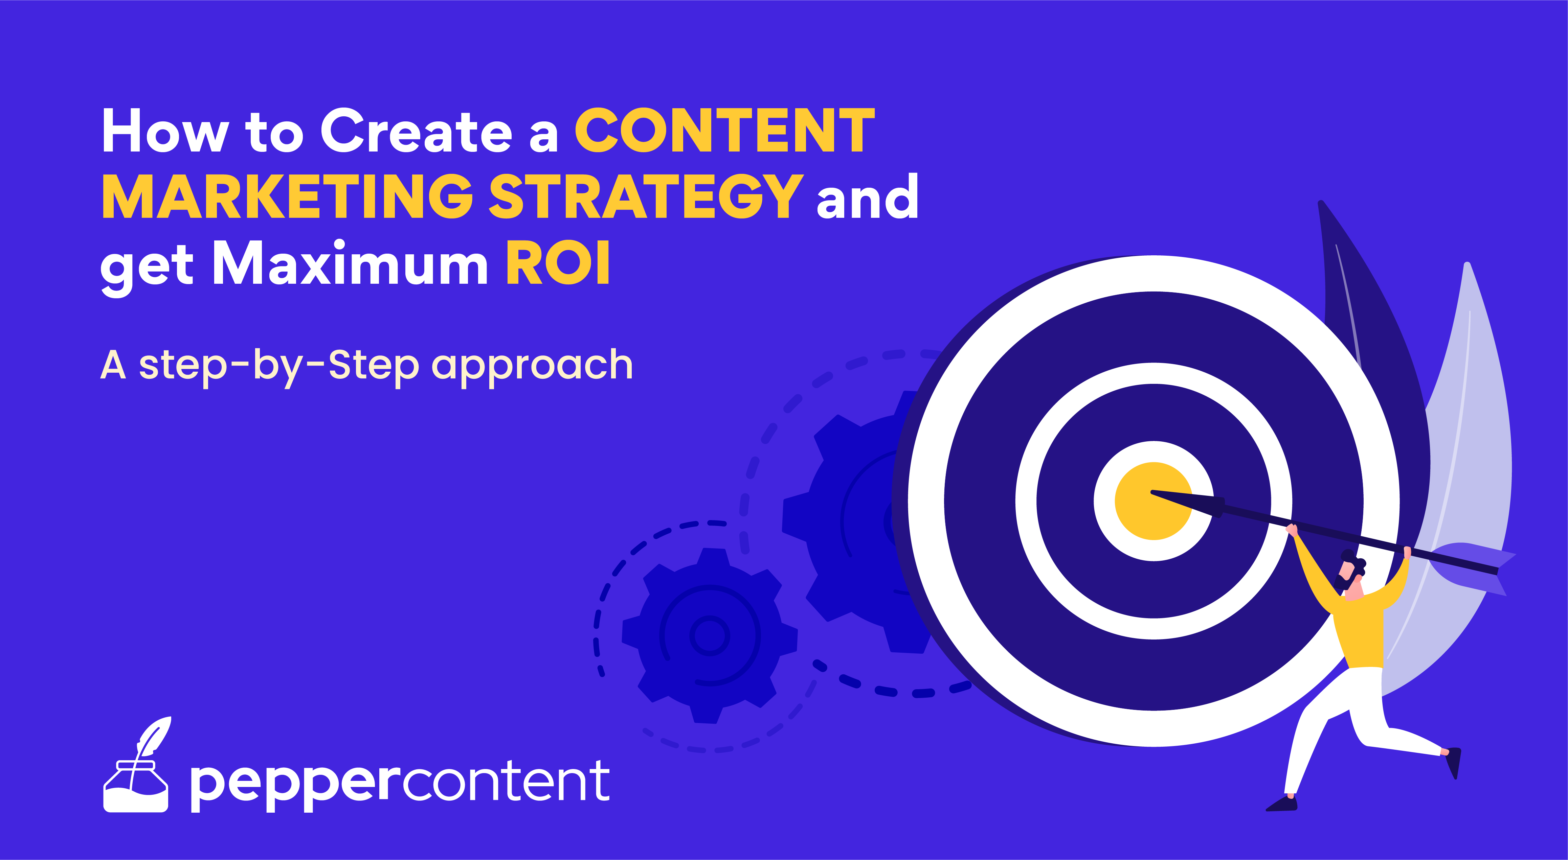 How to Create a Content Marketing Strategy (and Get the Maximum ROI)?